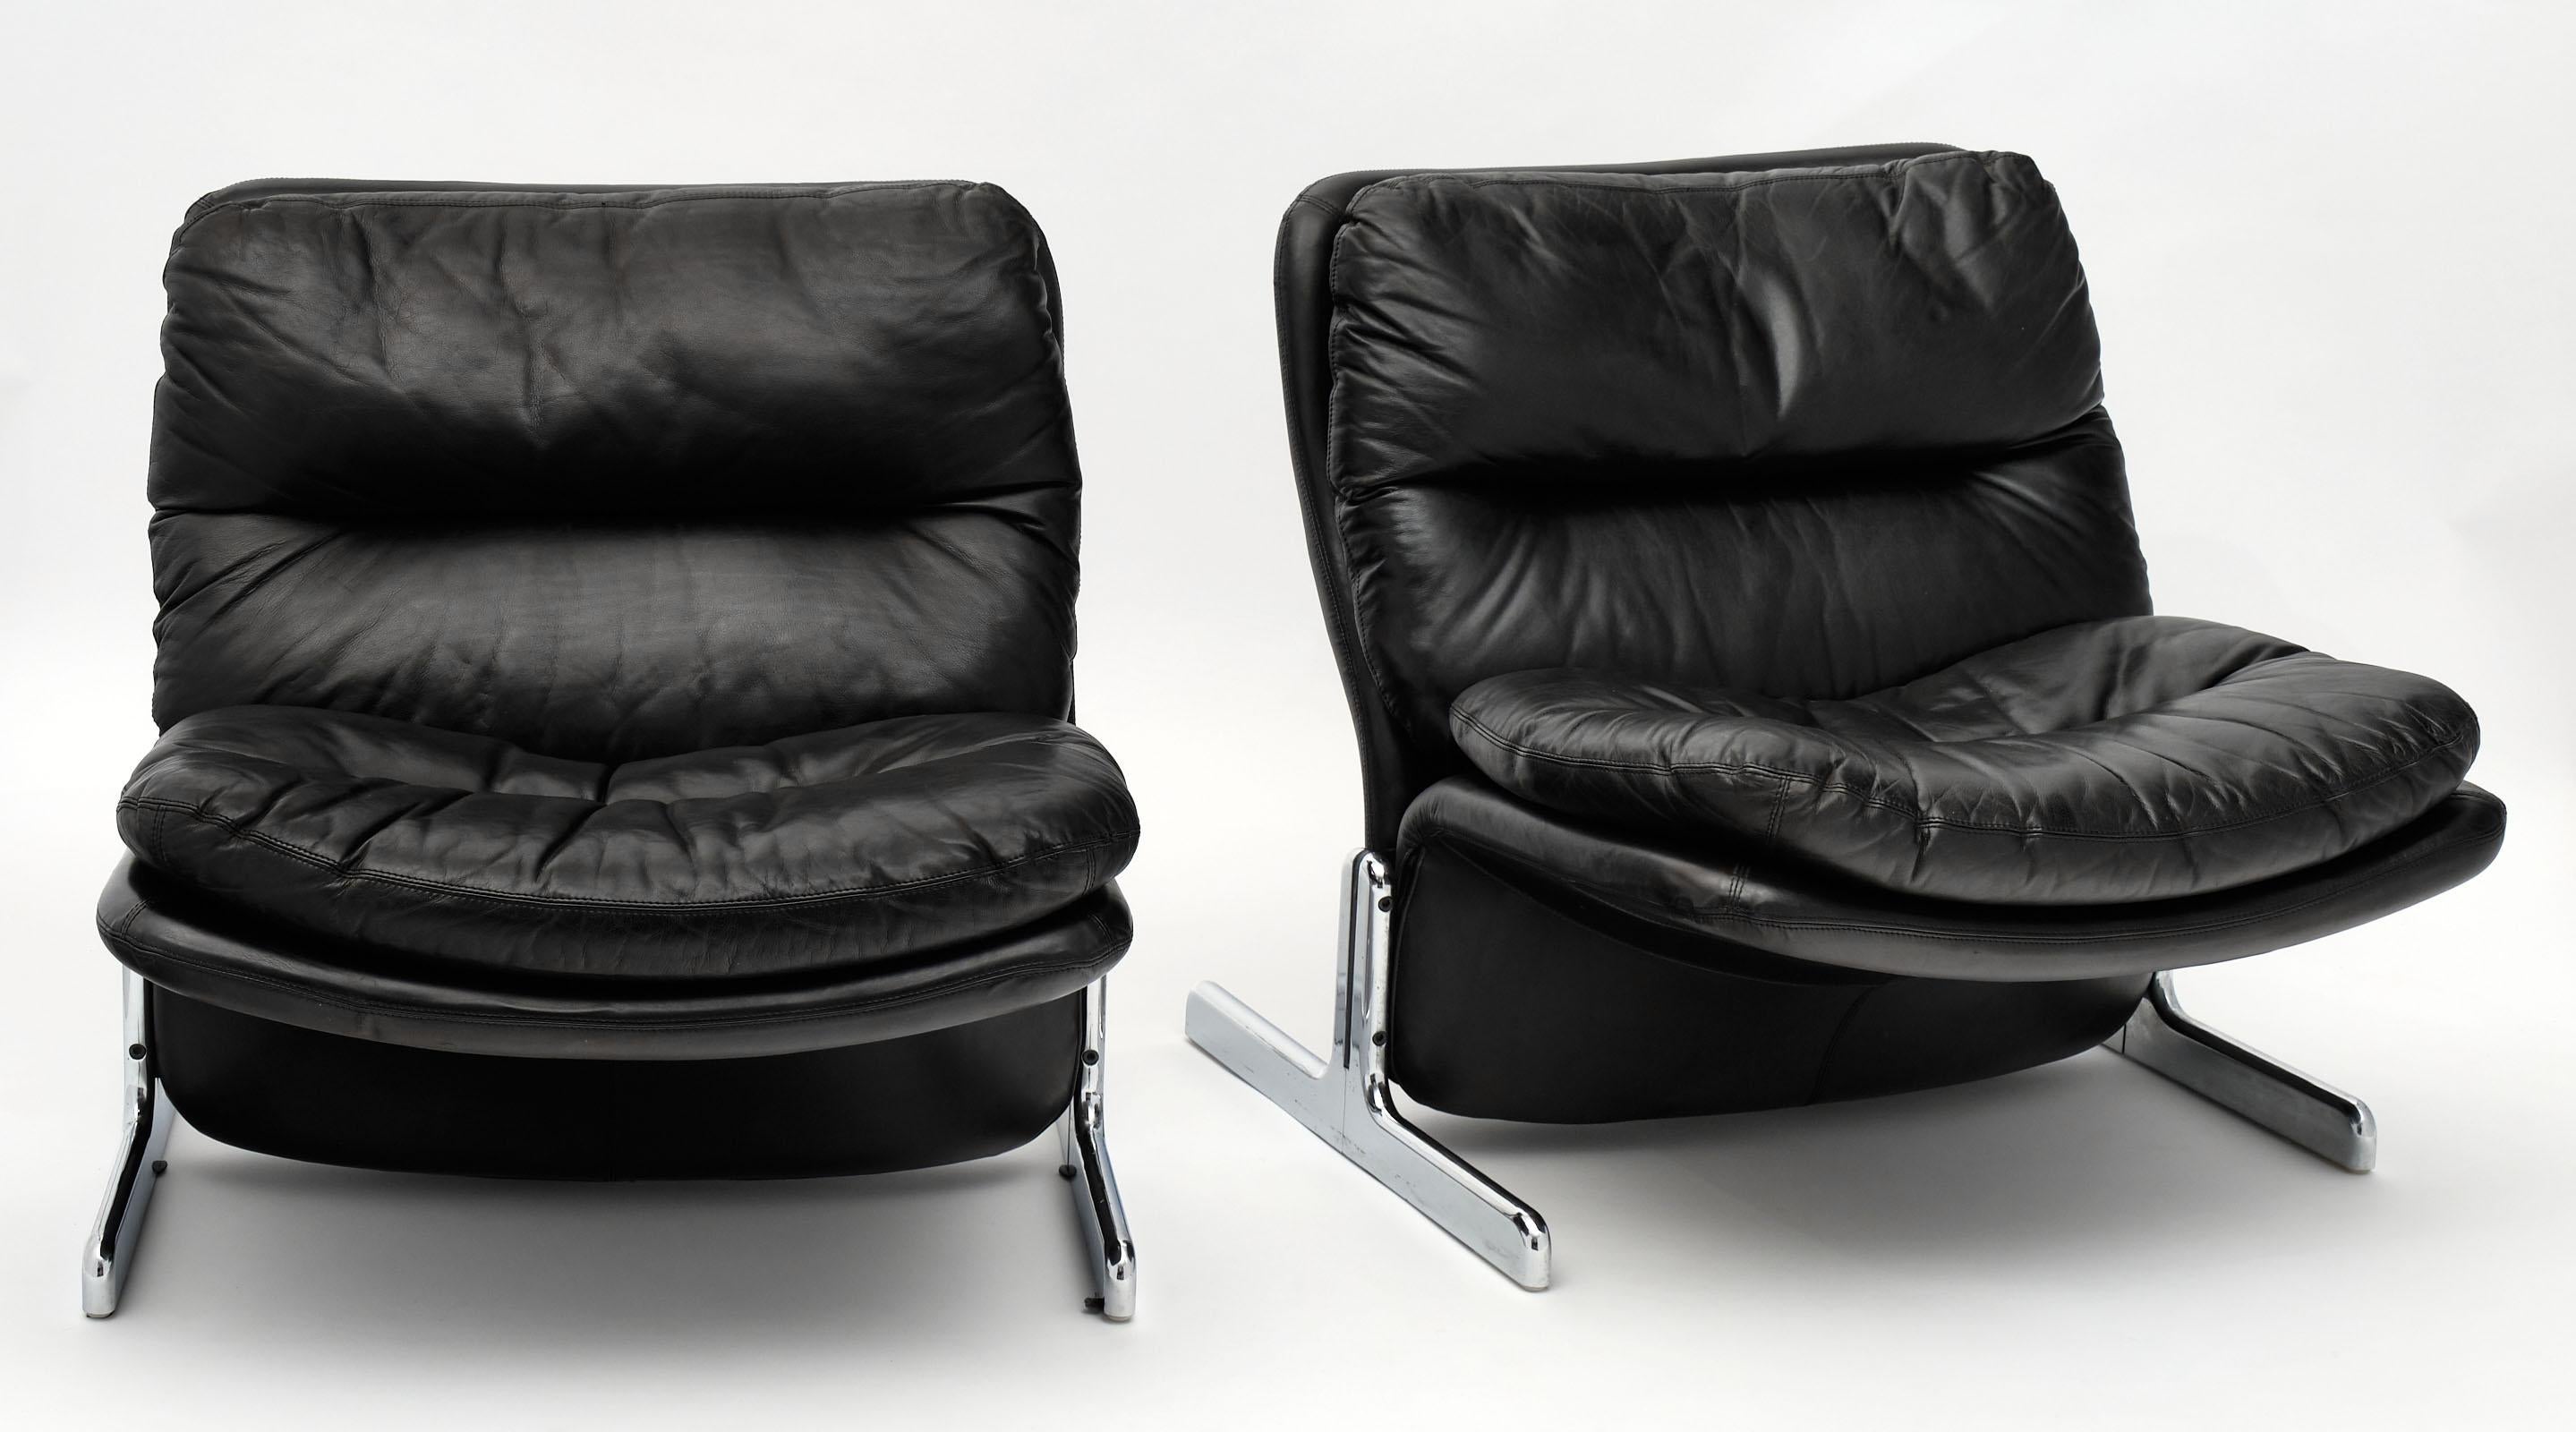 Italian leather modernist Brunati armchairs designed by Giampiero Vitelli and Titina Ammanati for Brunati. High density foam padding; original black leather upholstery, and a chromed steel structure make these chairs incredibly comfortable and